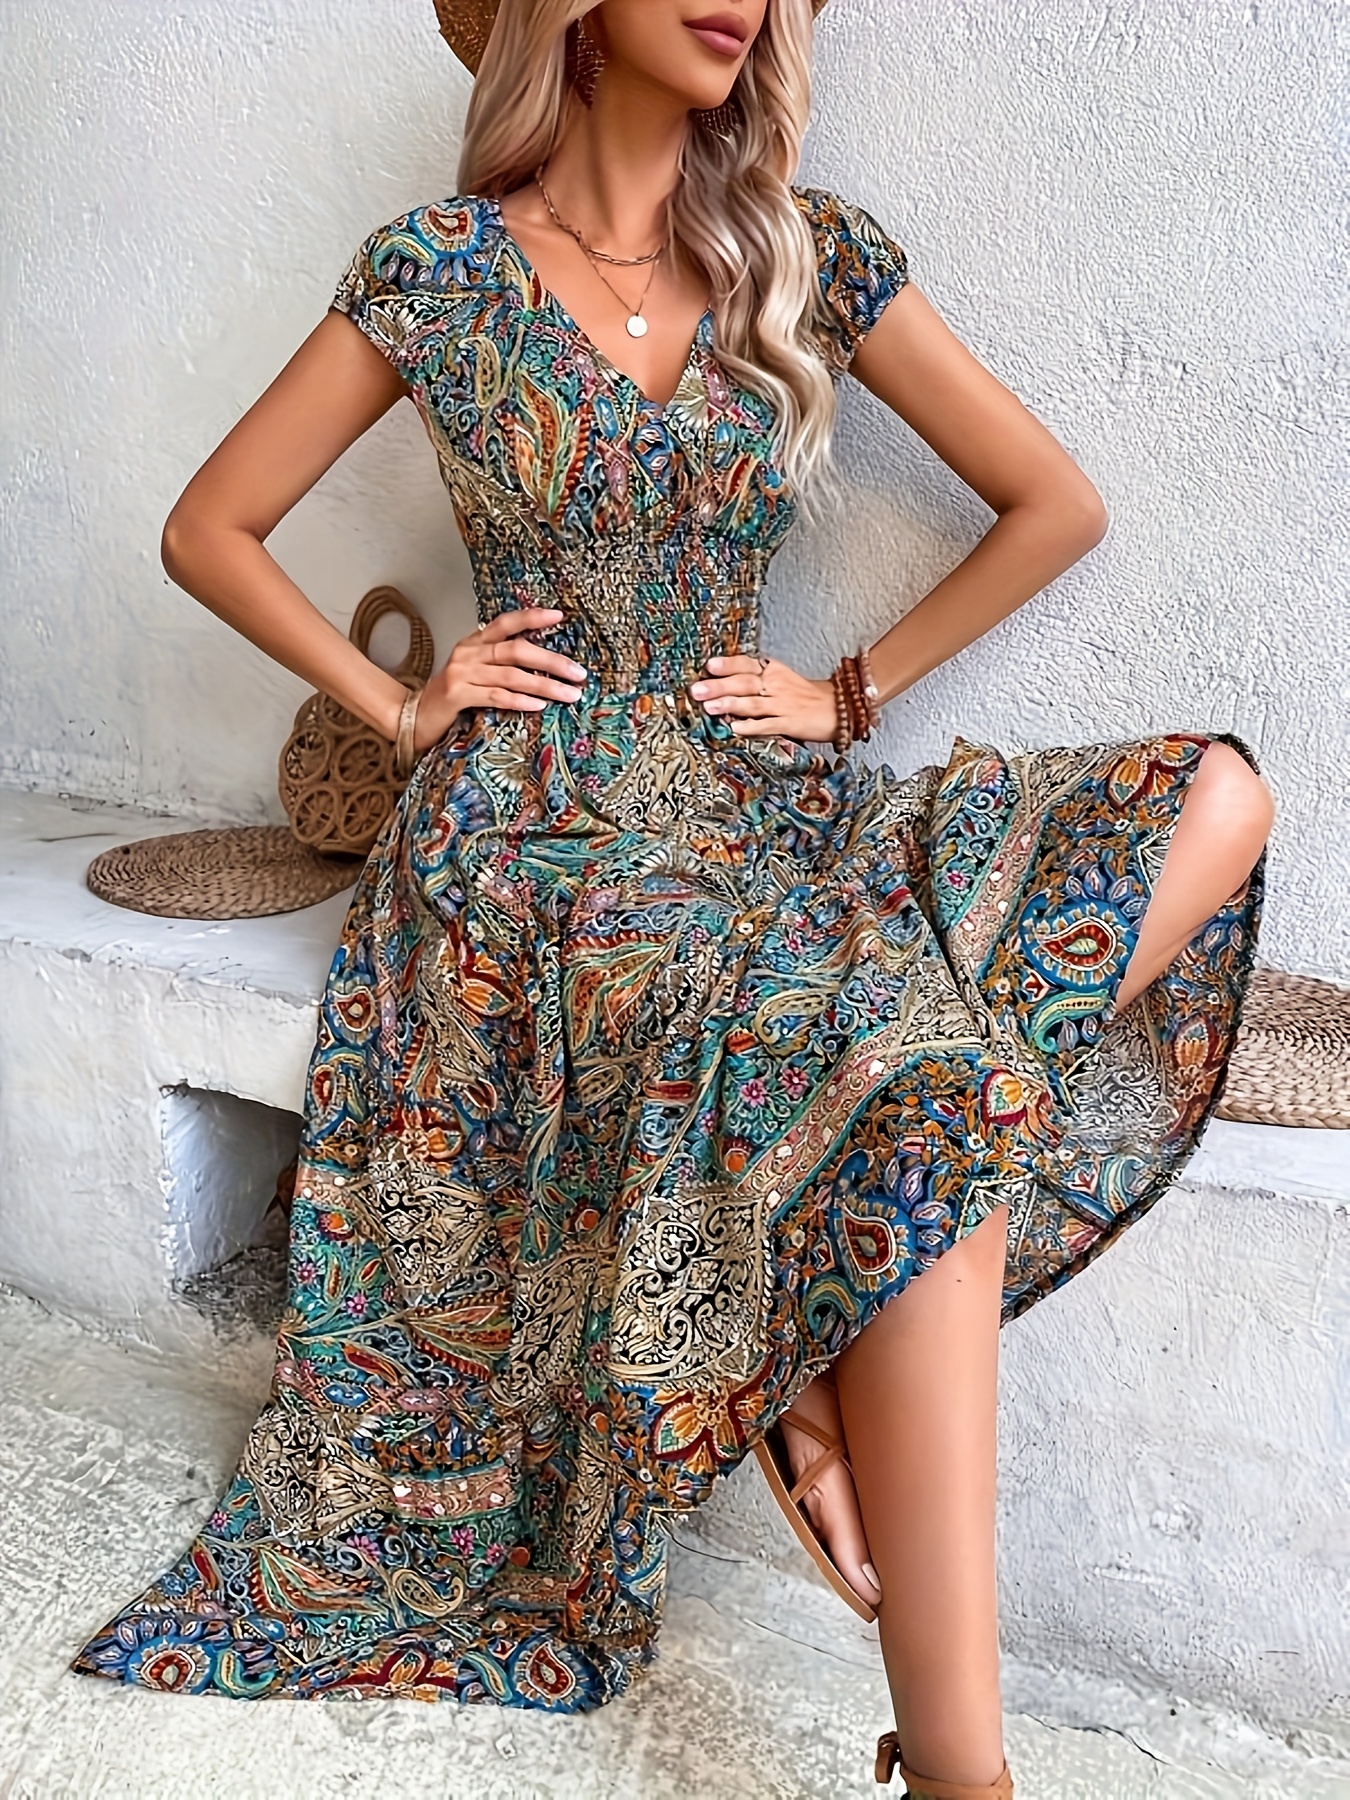 HSMQHJWE Womens Dress Clothes For Work Business Casual Dress For Summer  Women Summer Boho Floral Printed Dresses Square Neck A Line Beach Mini  Dress